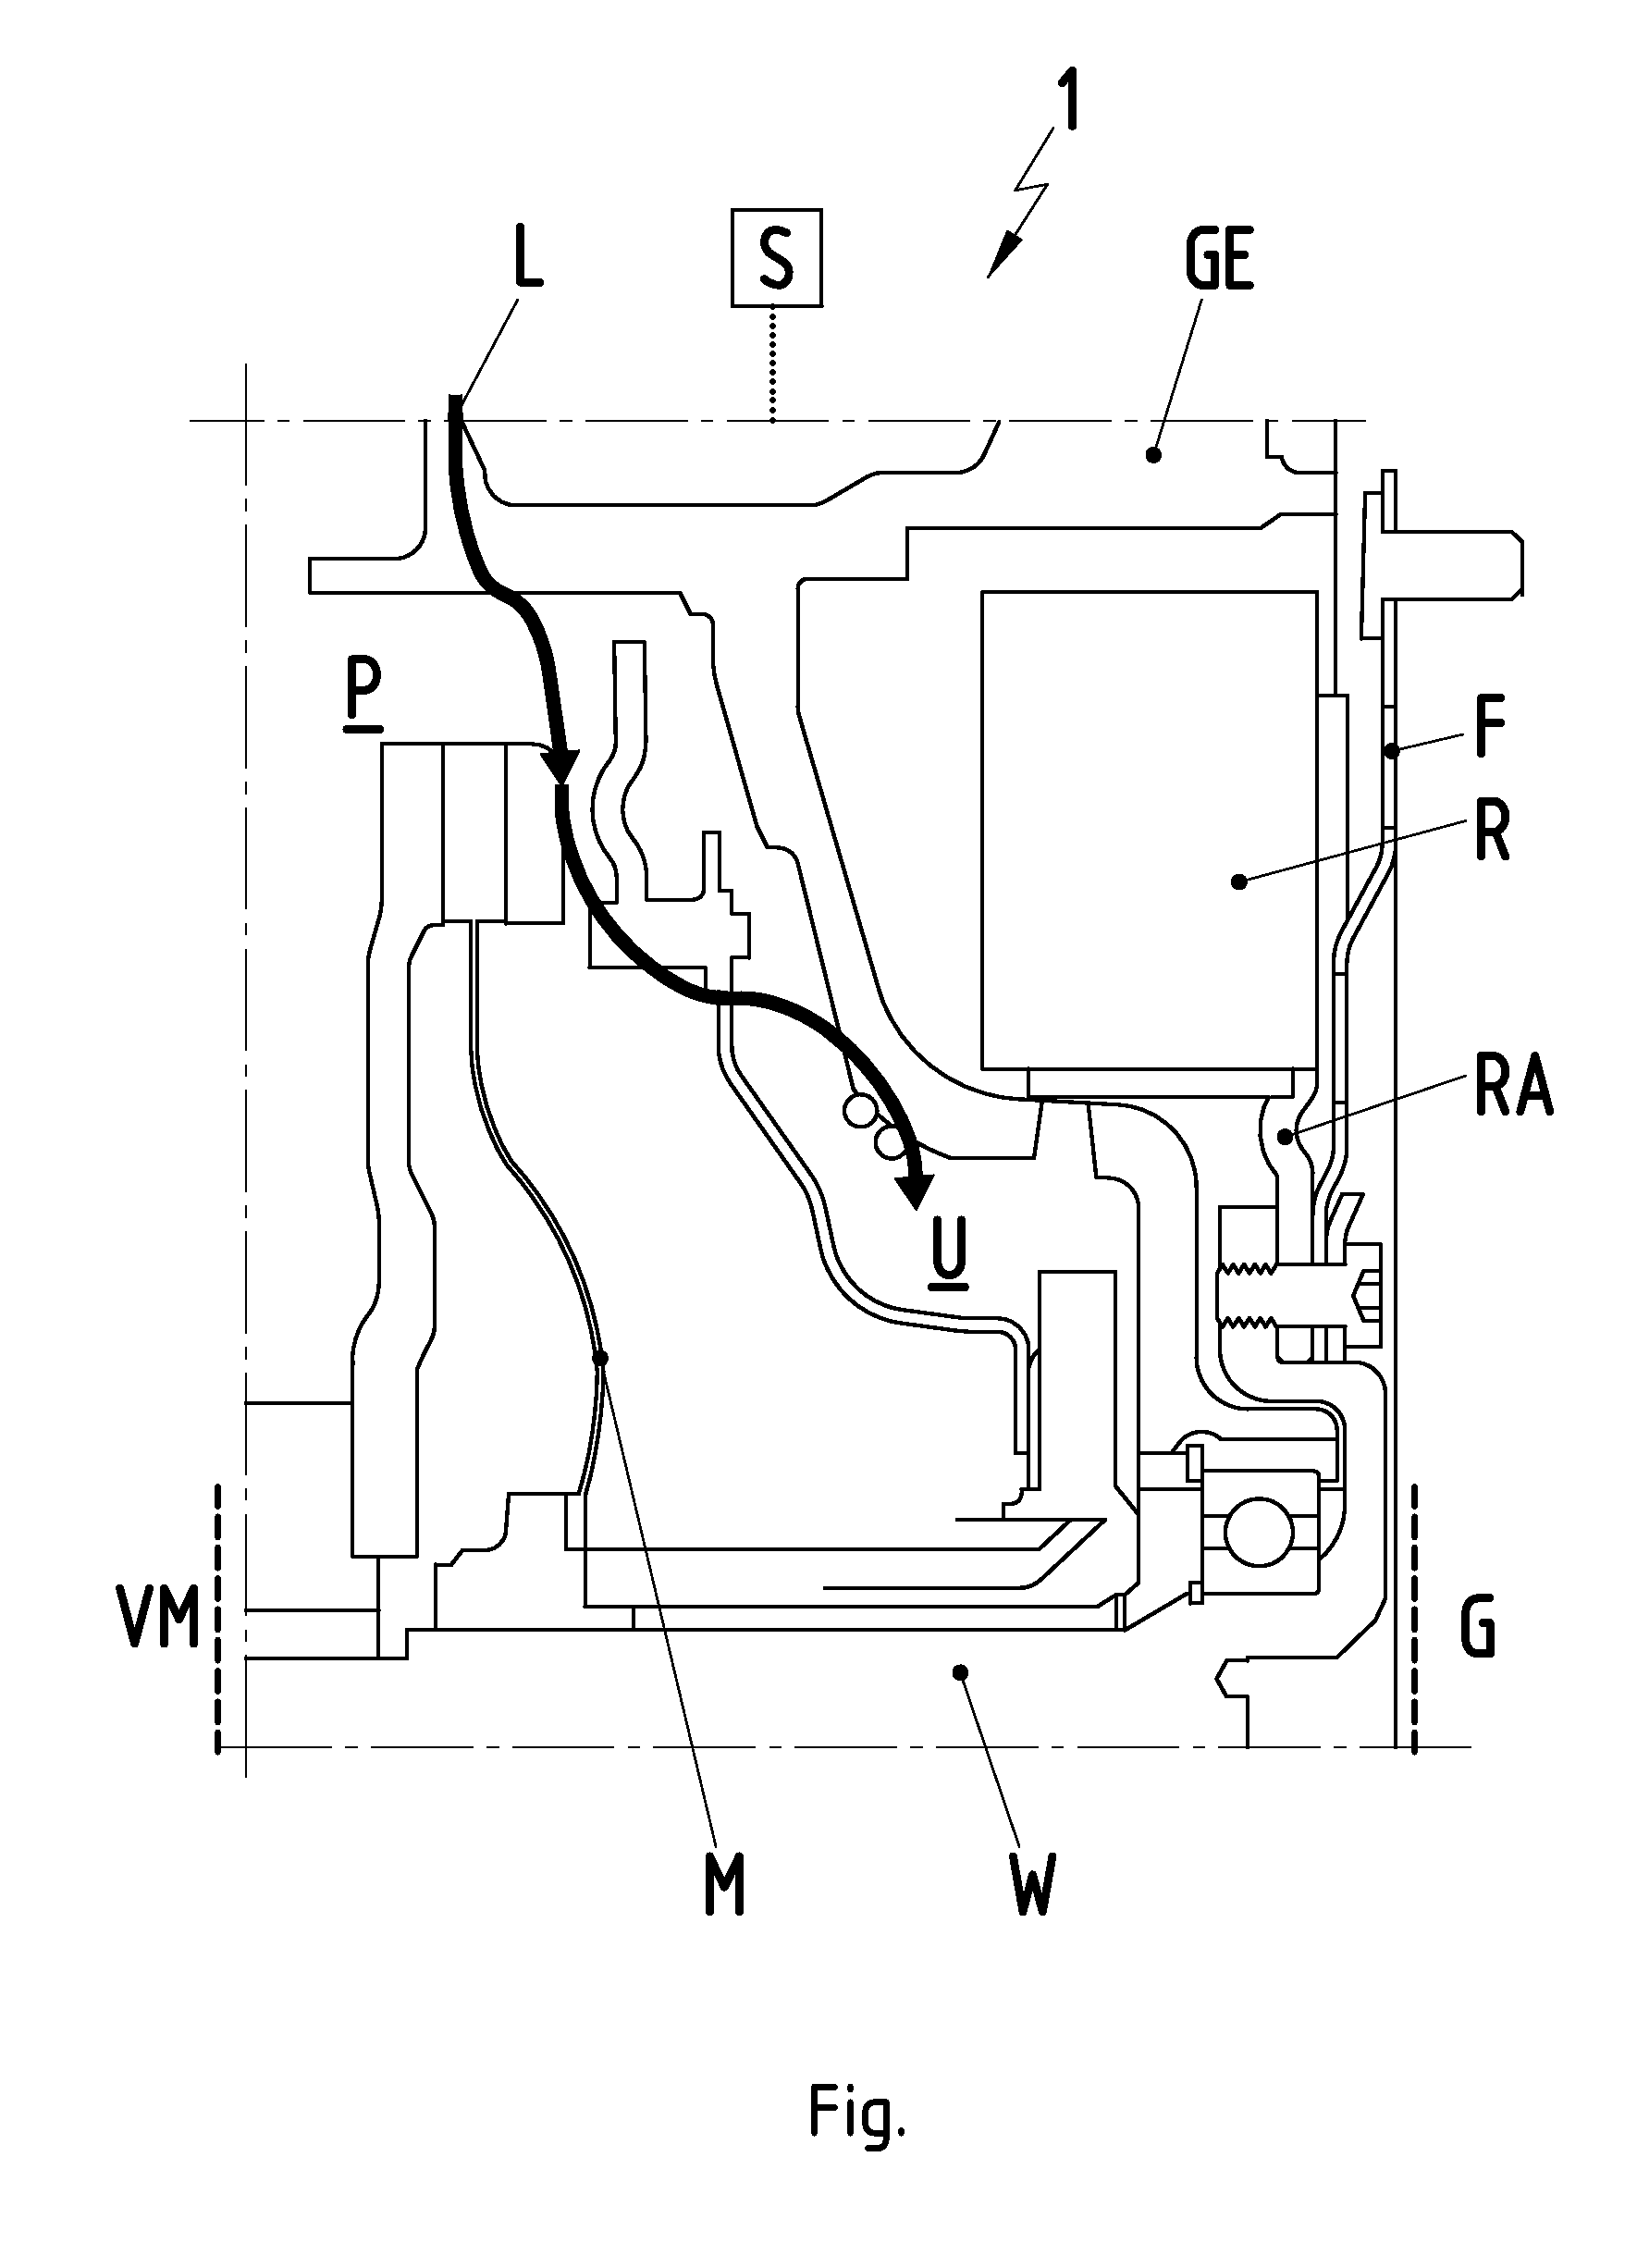 Device for sealing a component housing in a motor-vehicle drive train